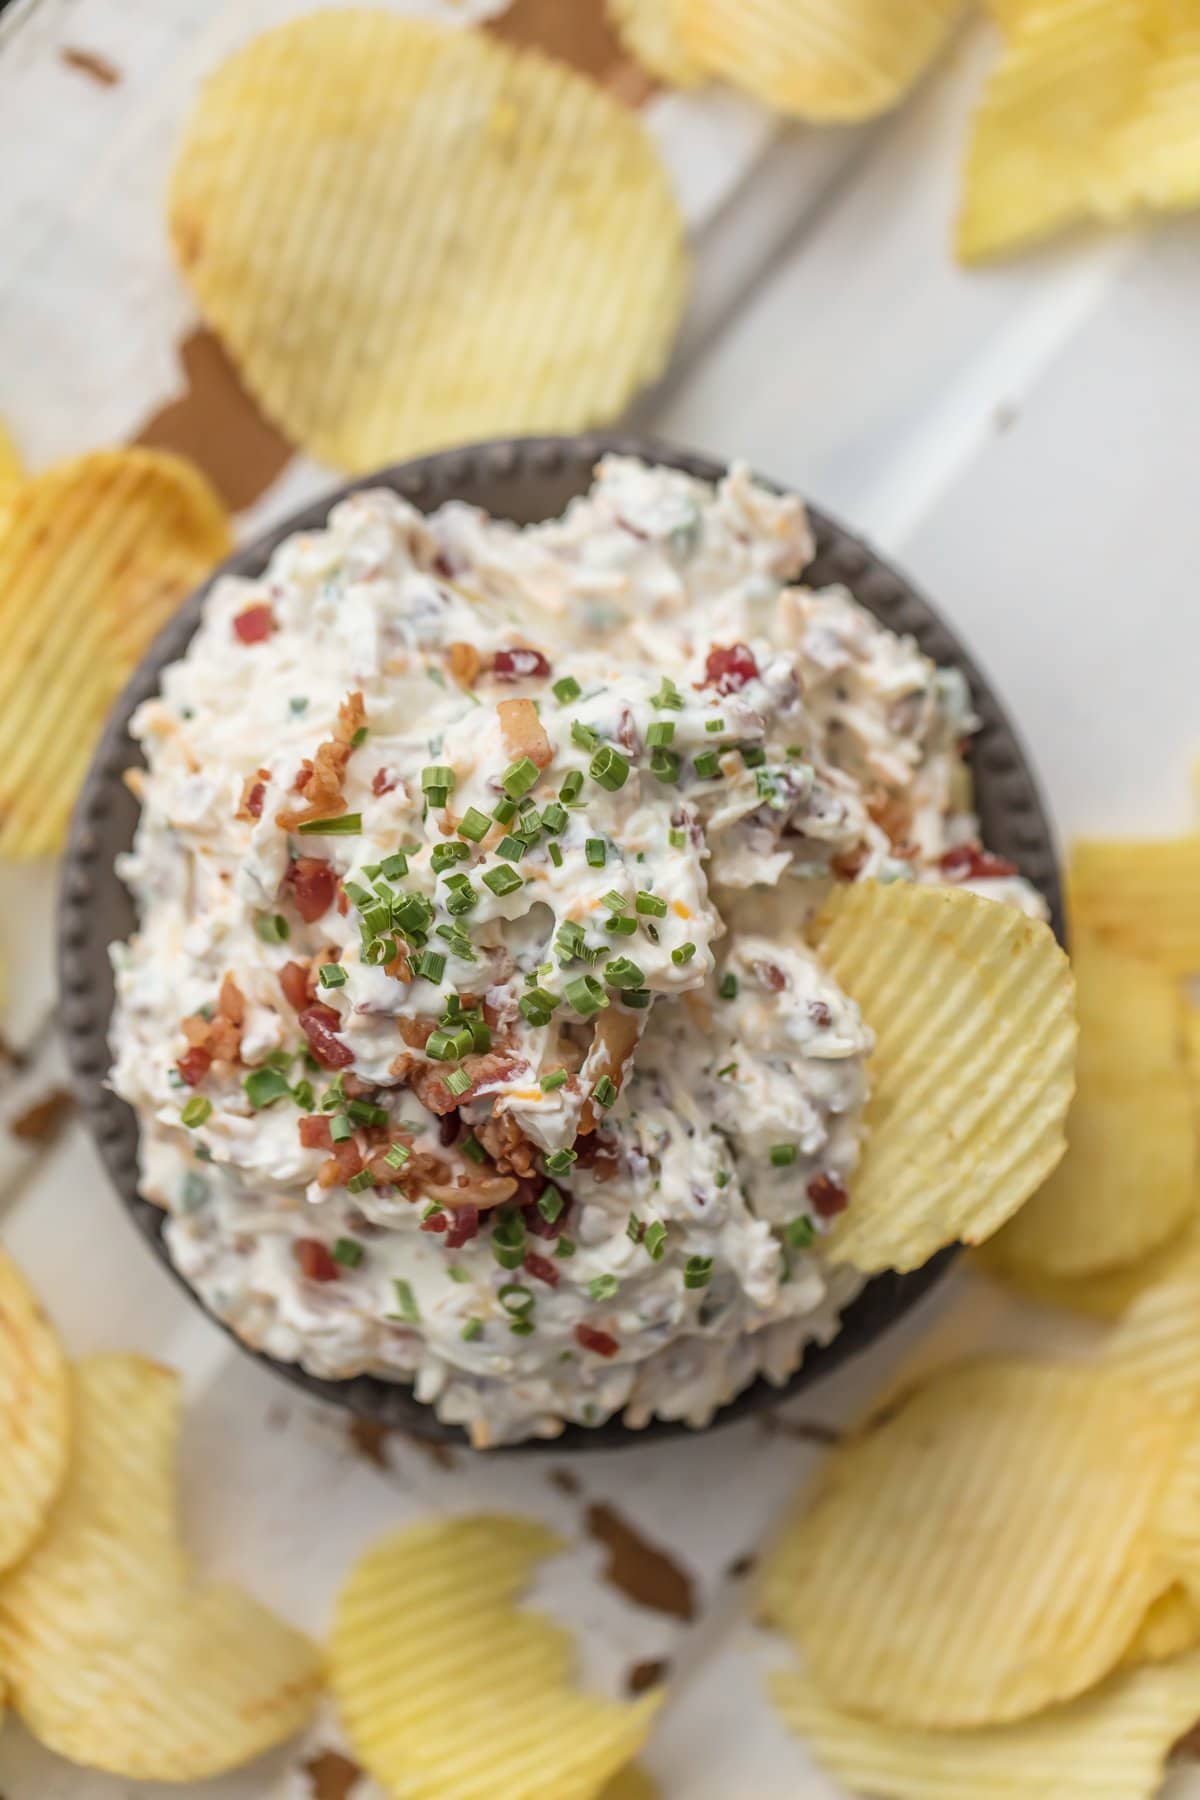 A bowl of caramelized onion bacon dip, surrounded by ruffled potato chips